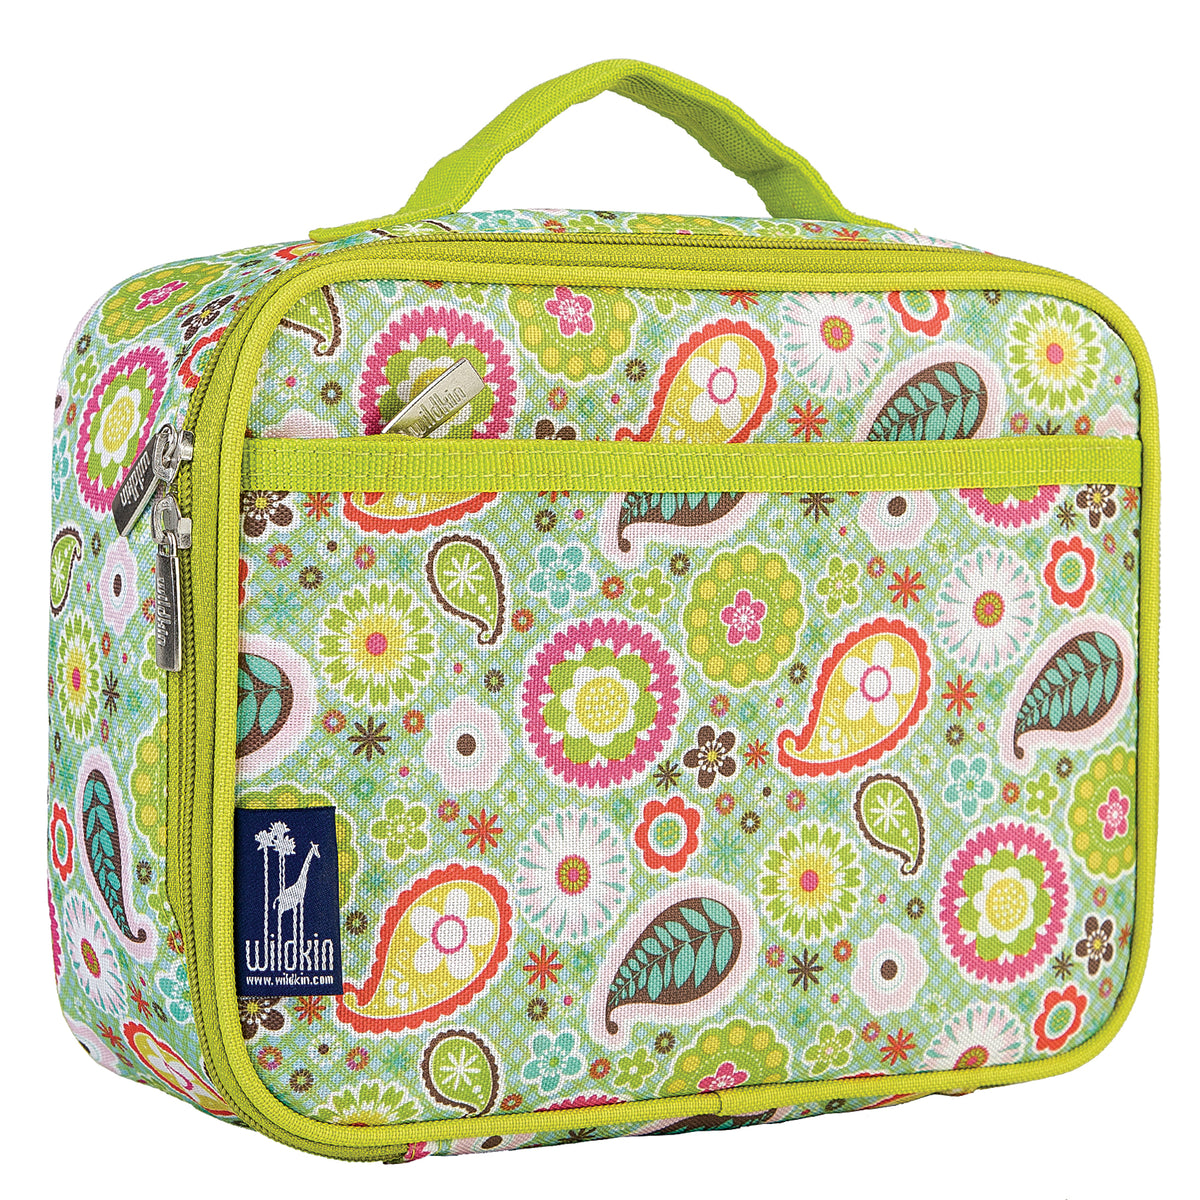 Wildkin Lunch Box Bag | Kids Lunch Box | Lunch Bags - Spring Bloom